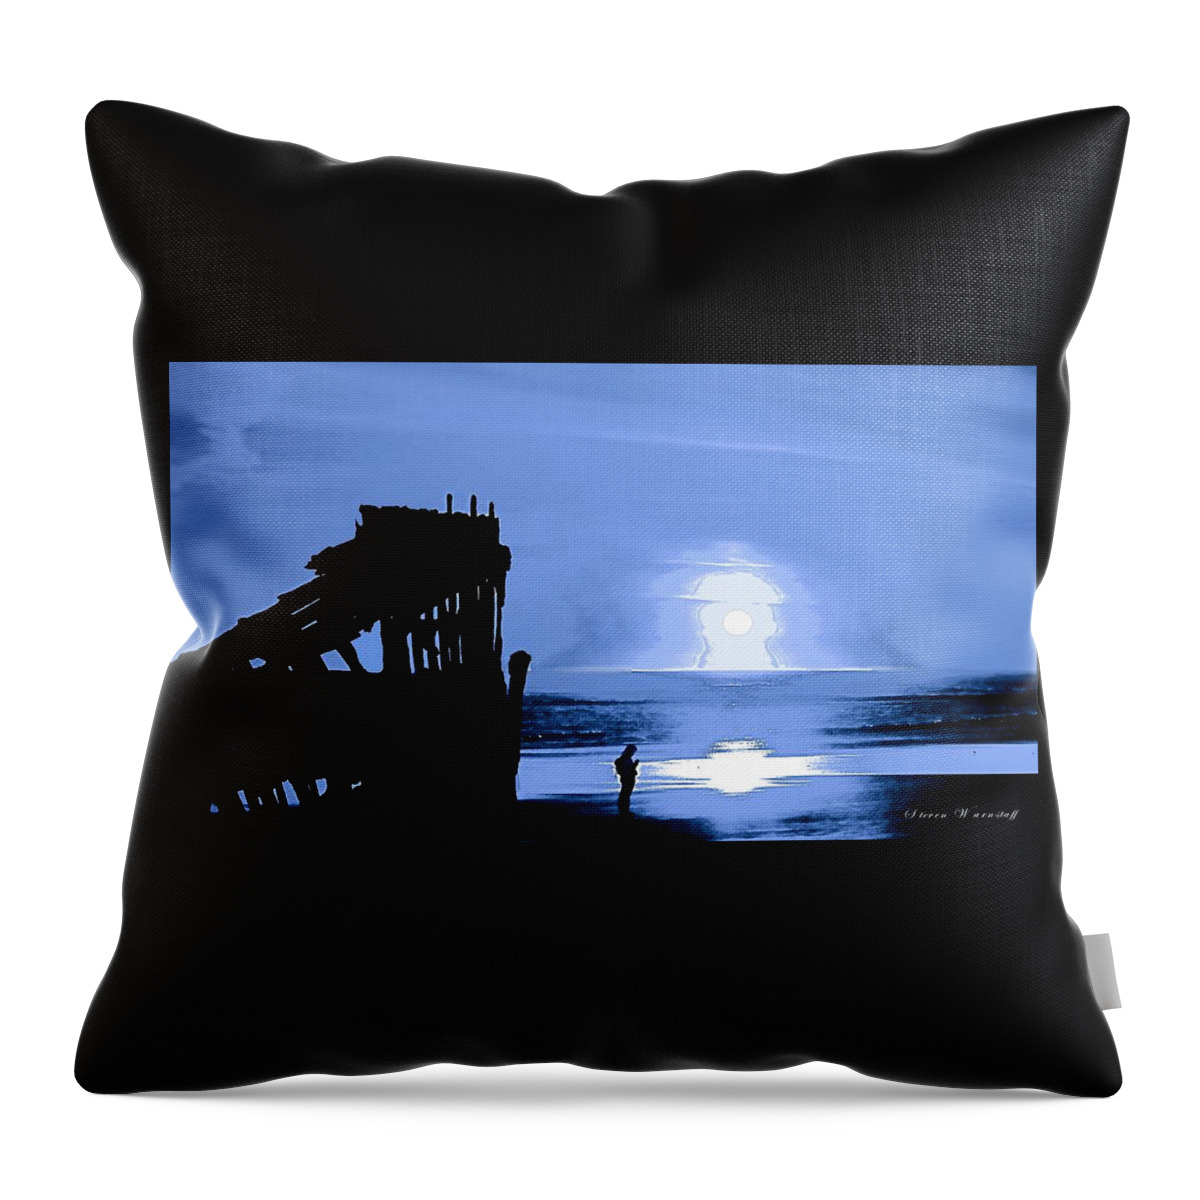 Oregon Throw Pillow featuring the photograph Marooned by Steve Warnstaff